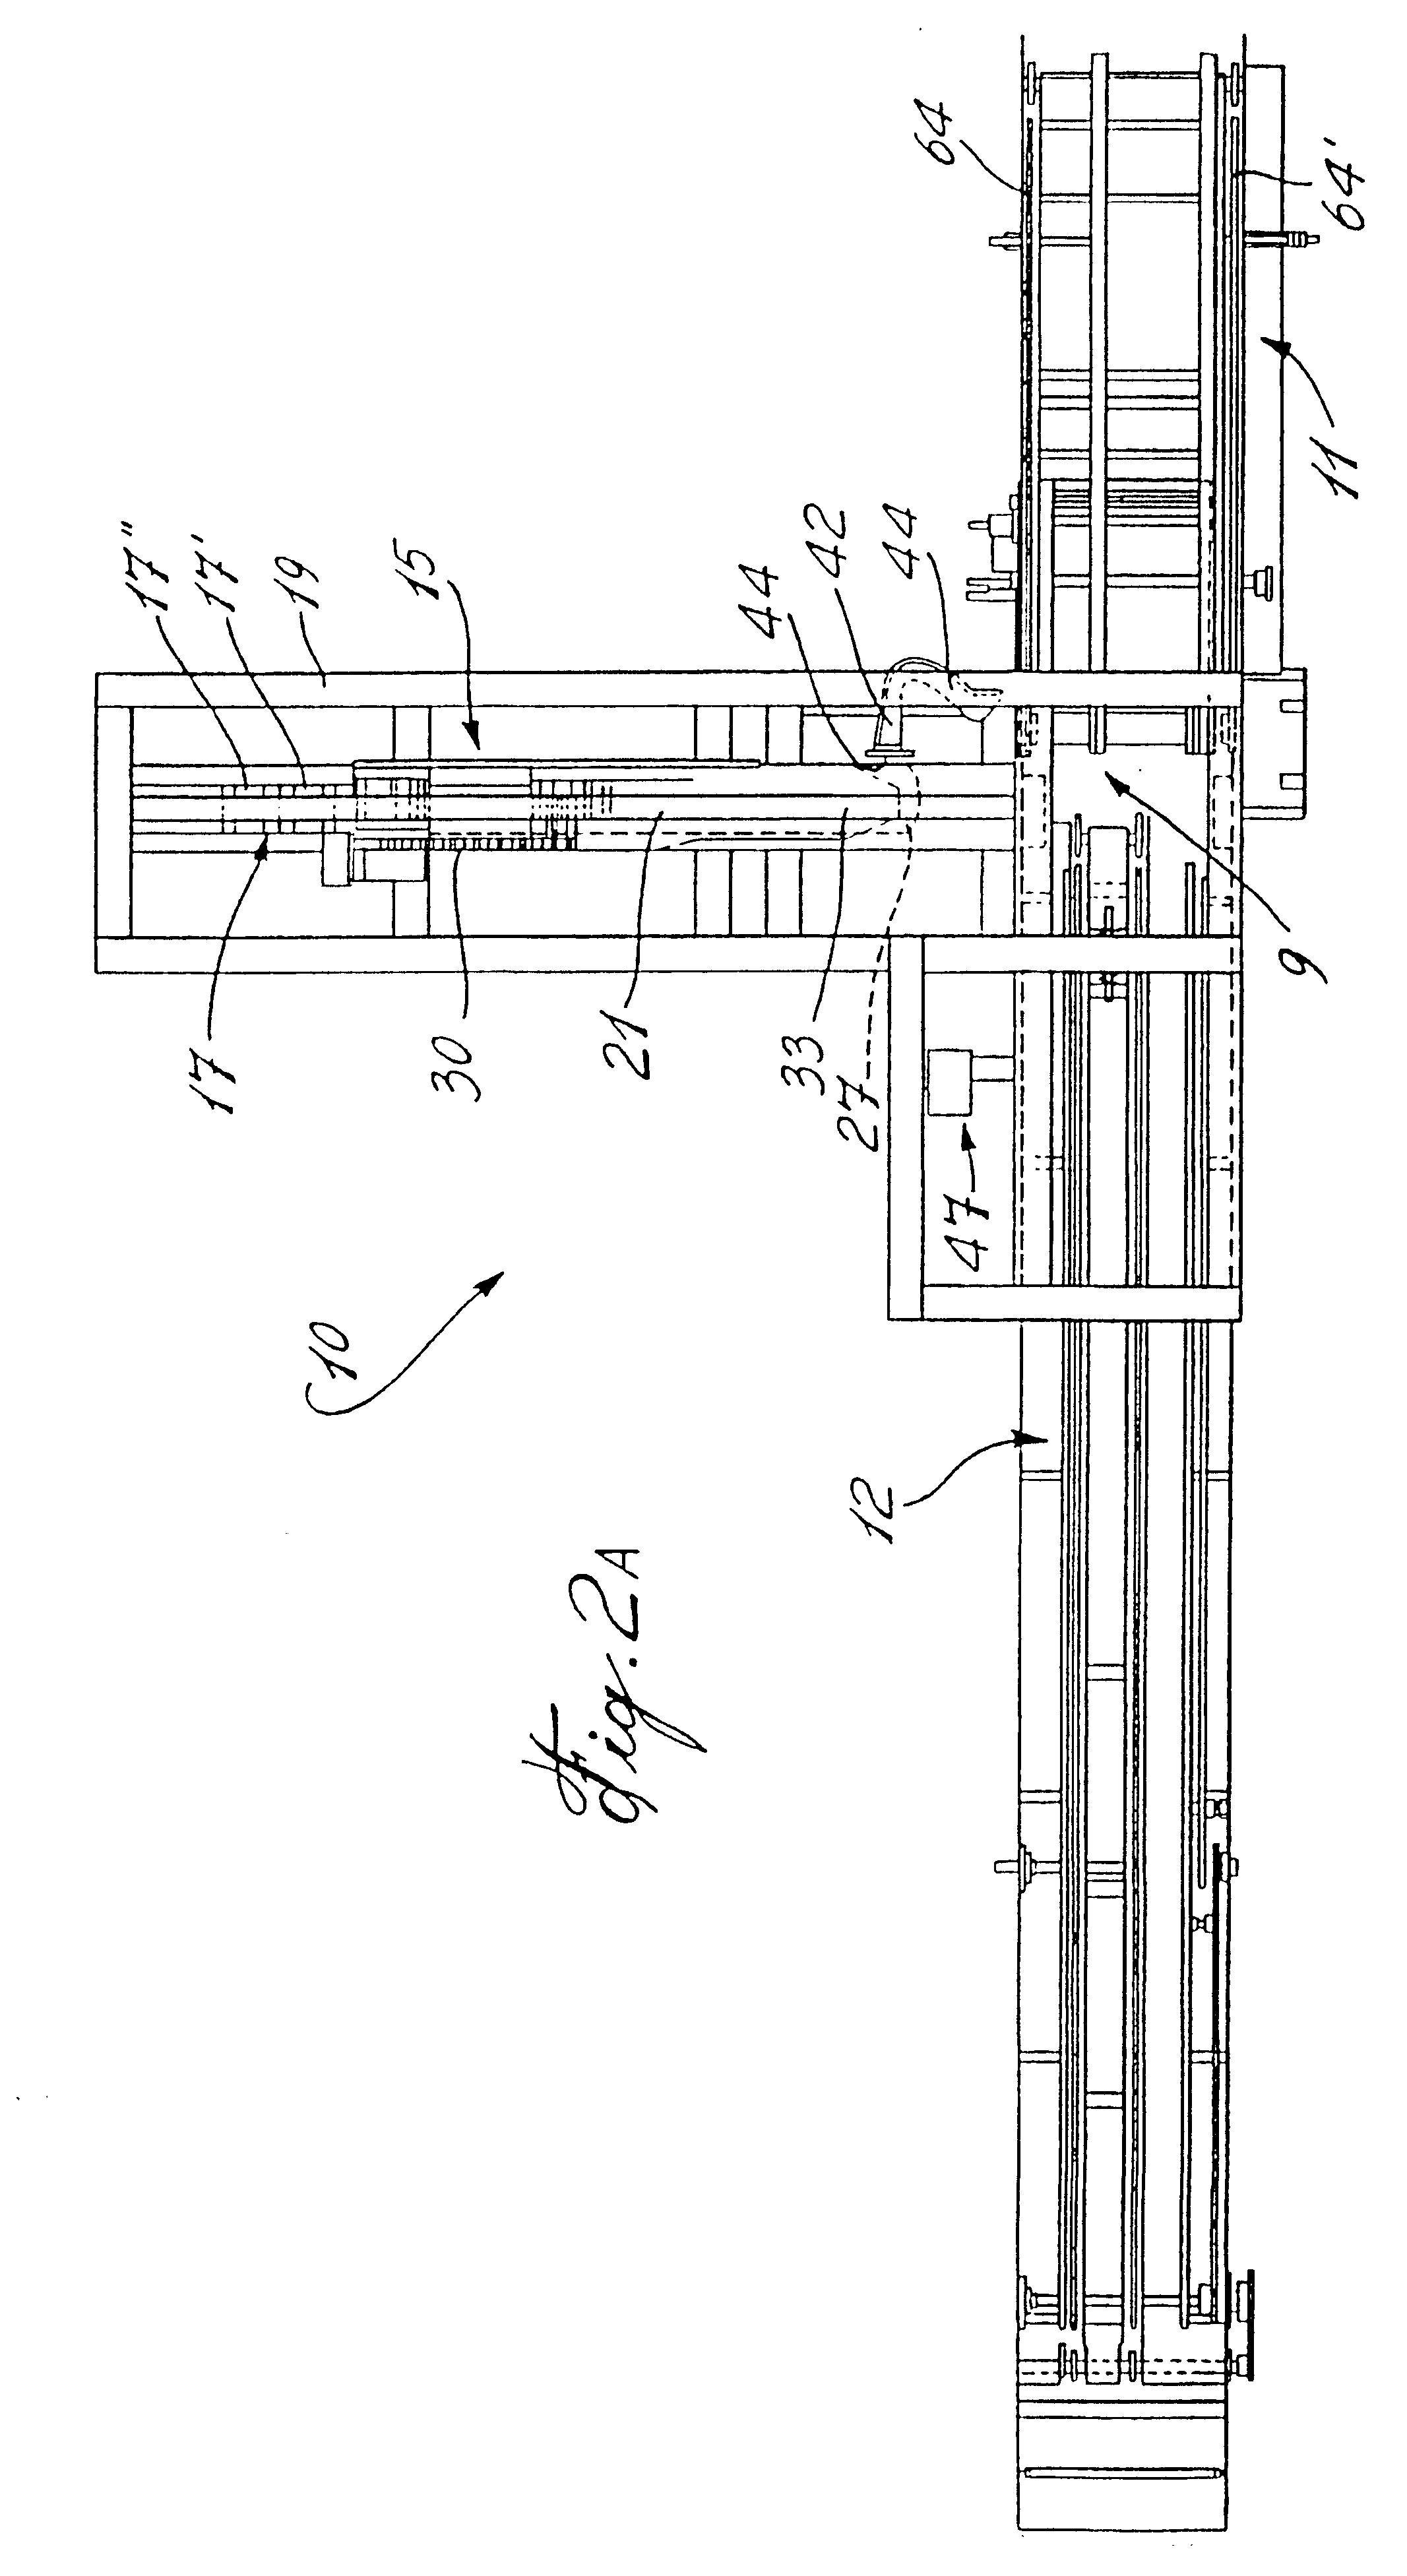 High speed linear bagging machine and method of operation